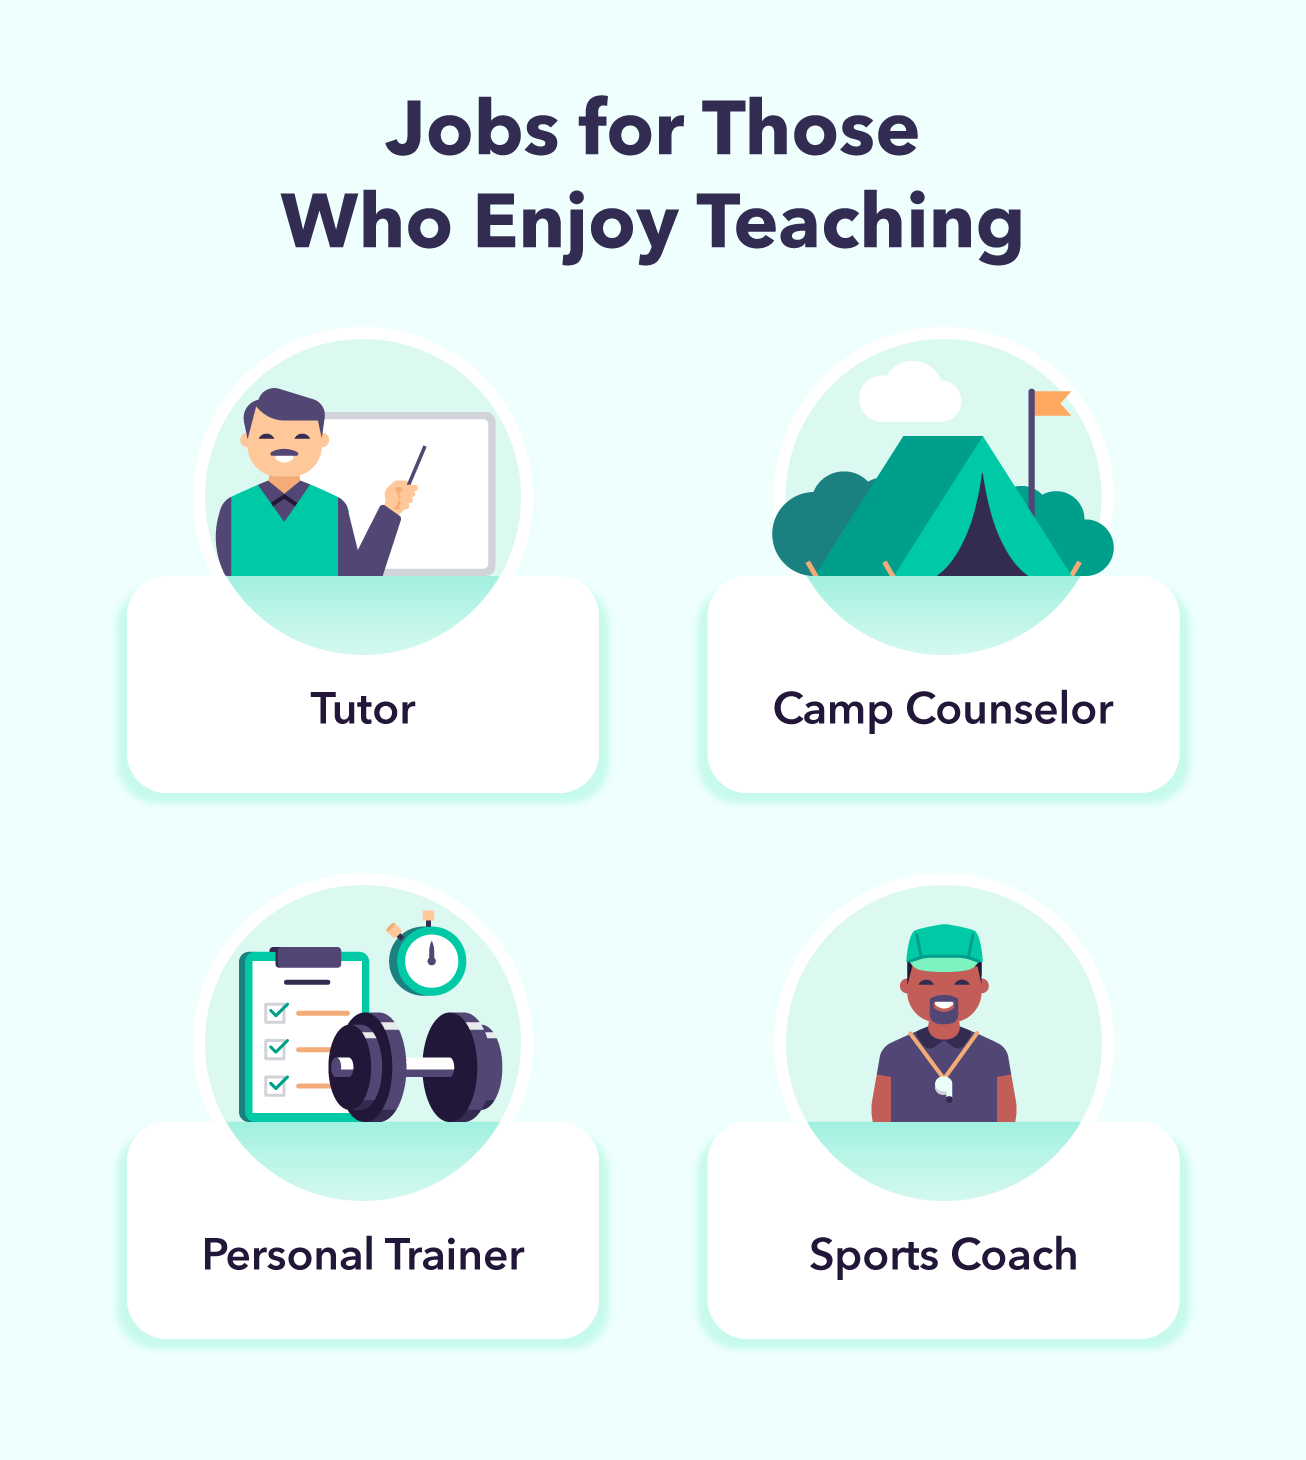 A graphic lists 4 summer job ideas for those who enjoy teaching.